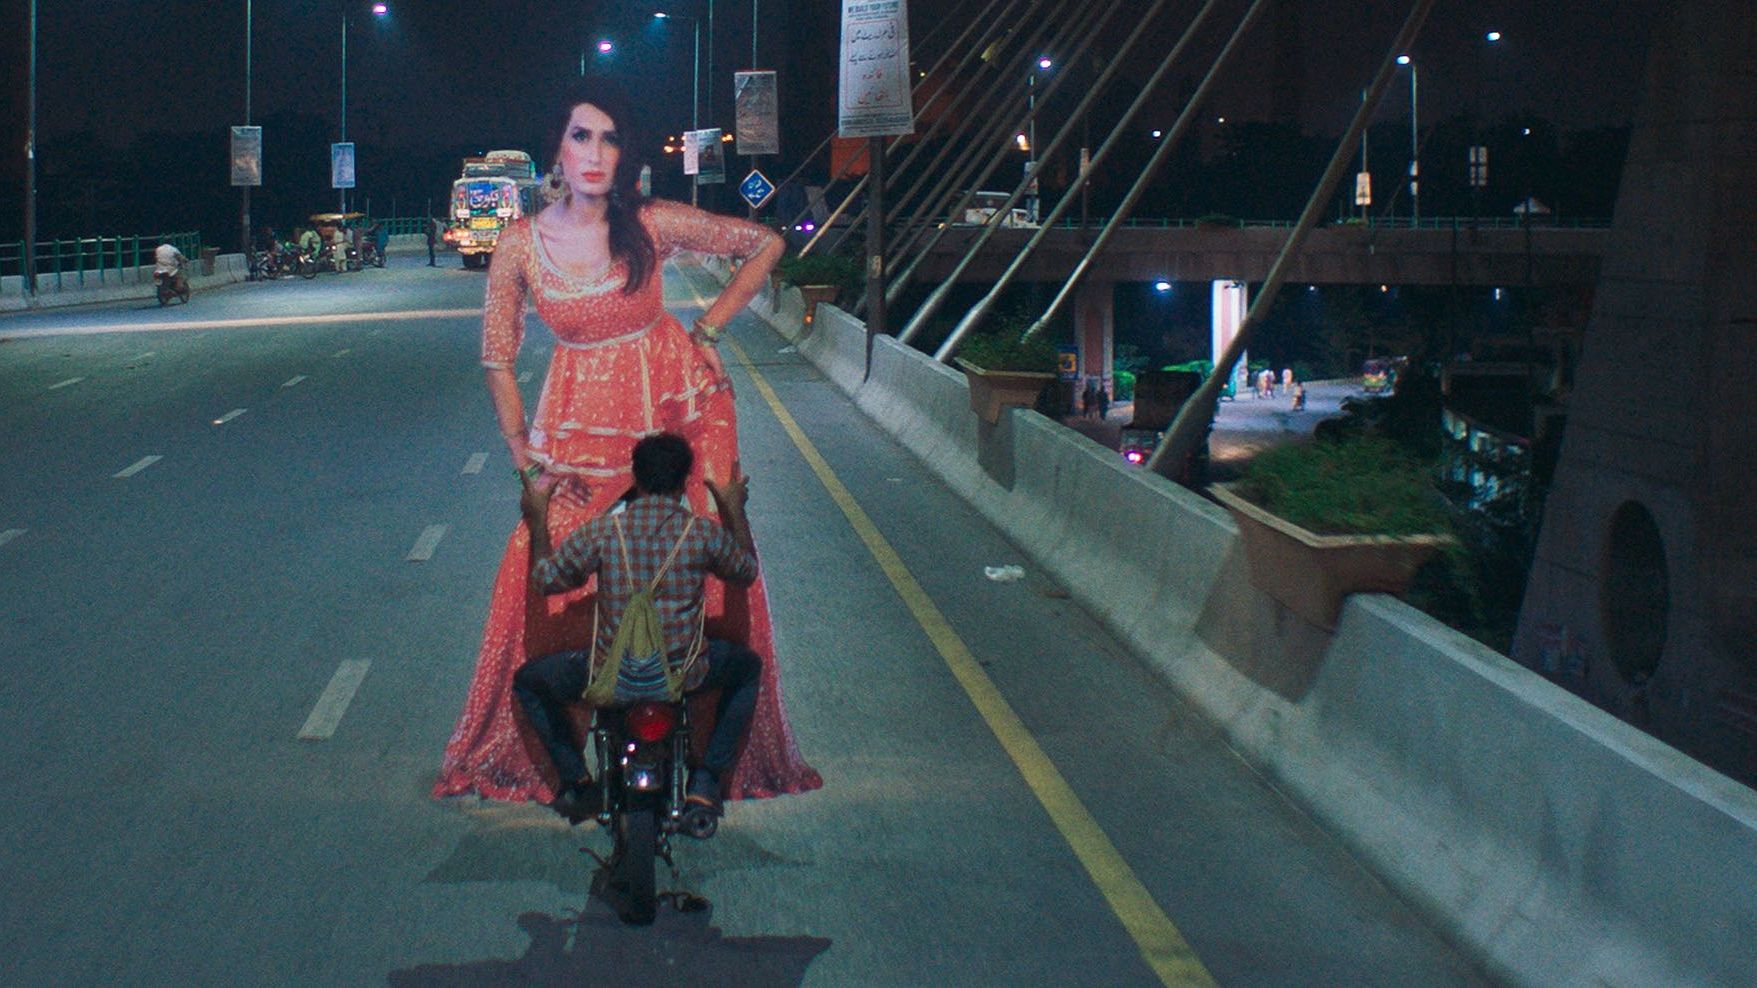 She ain't heavy, she's my lover: Juneo takes a cut-out of Khan home in Joyland / Photo courtesy of Sundance Institute